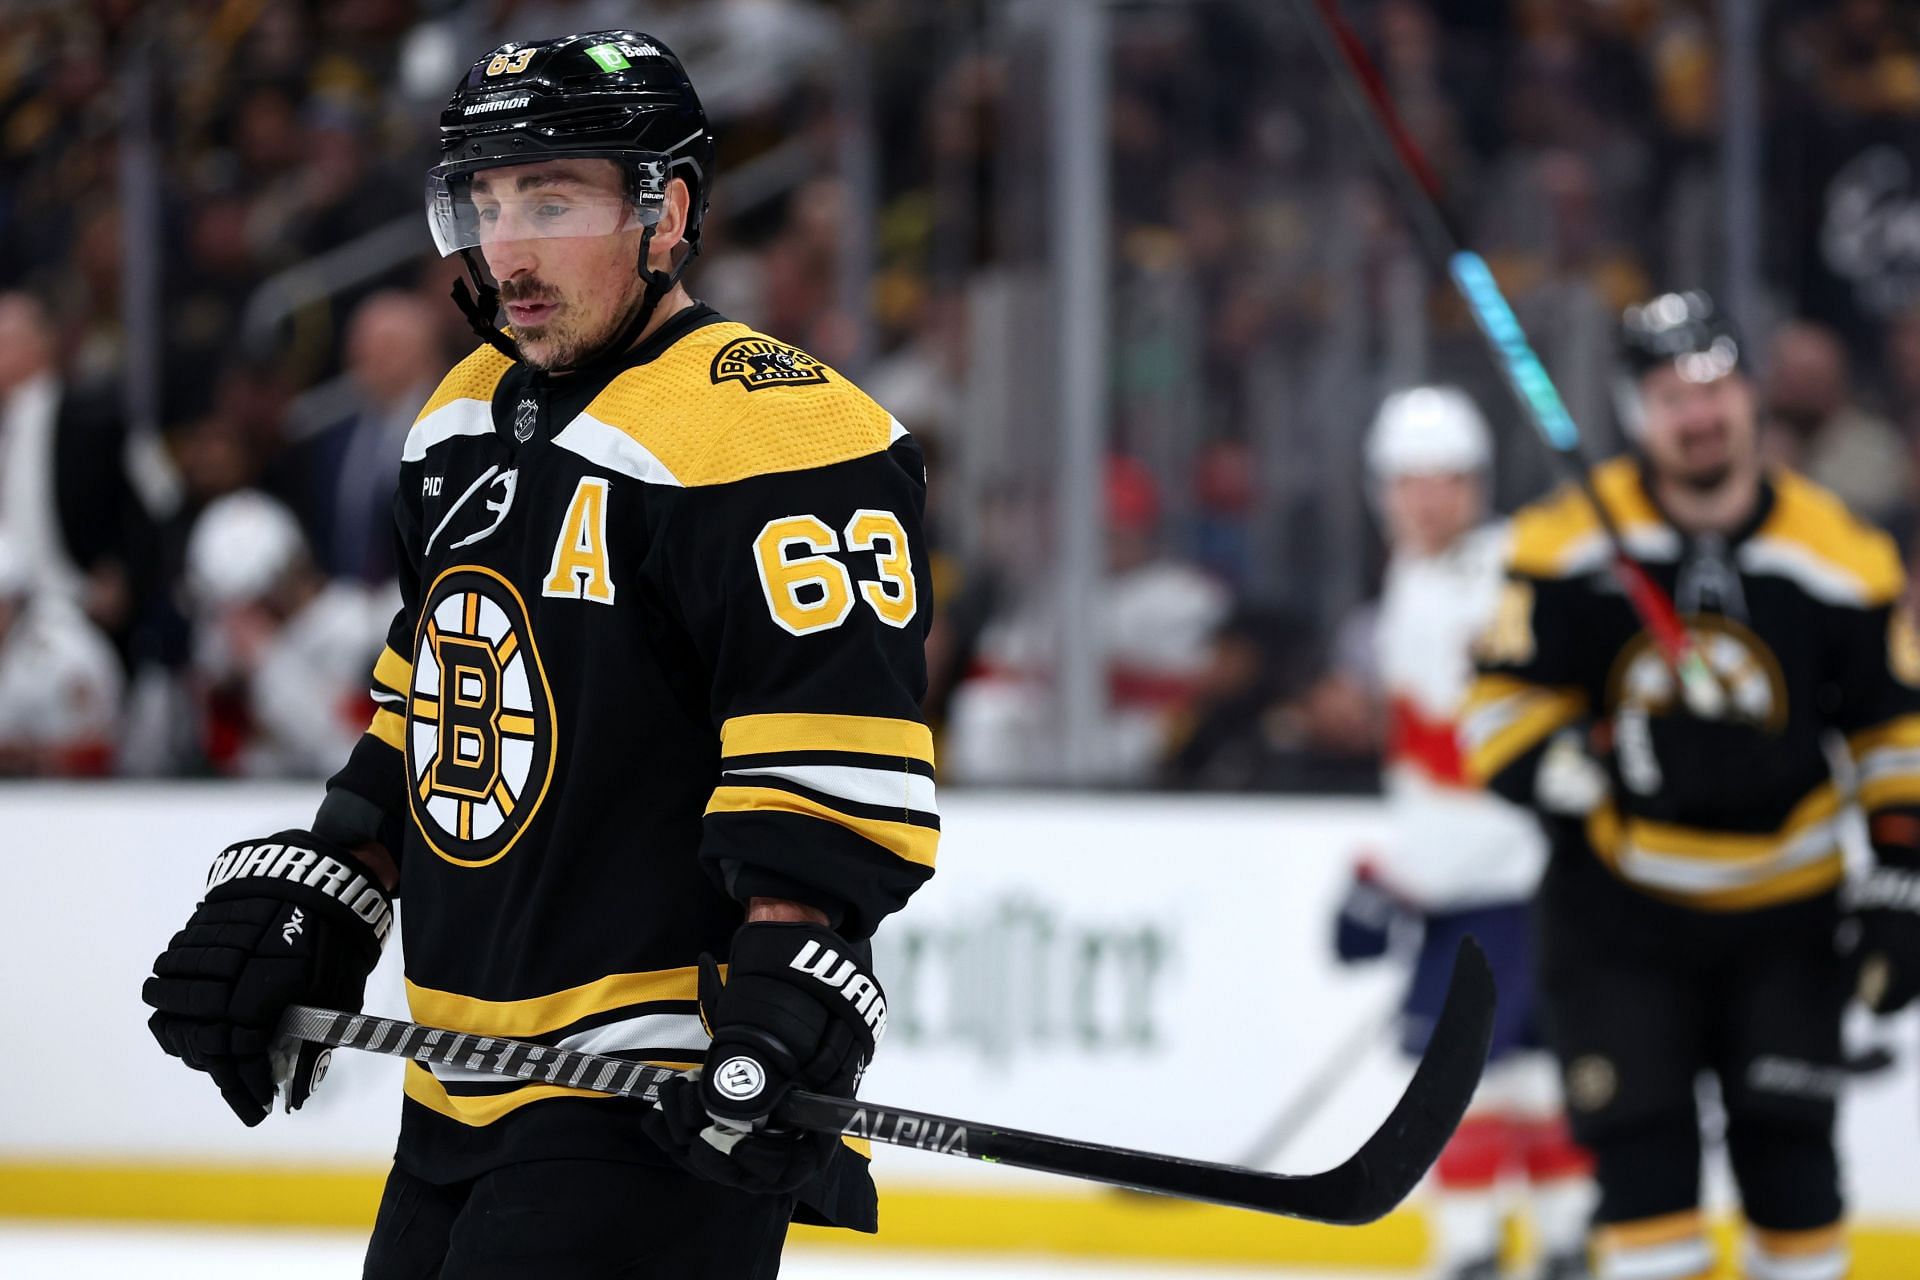 Patrice Bergeron, Bruins agree on contract: Boston captain